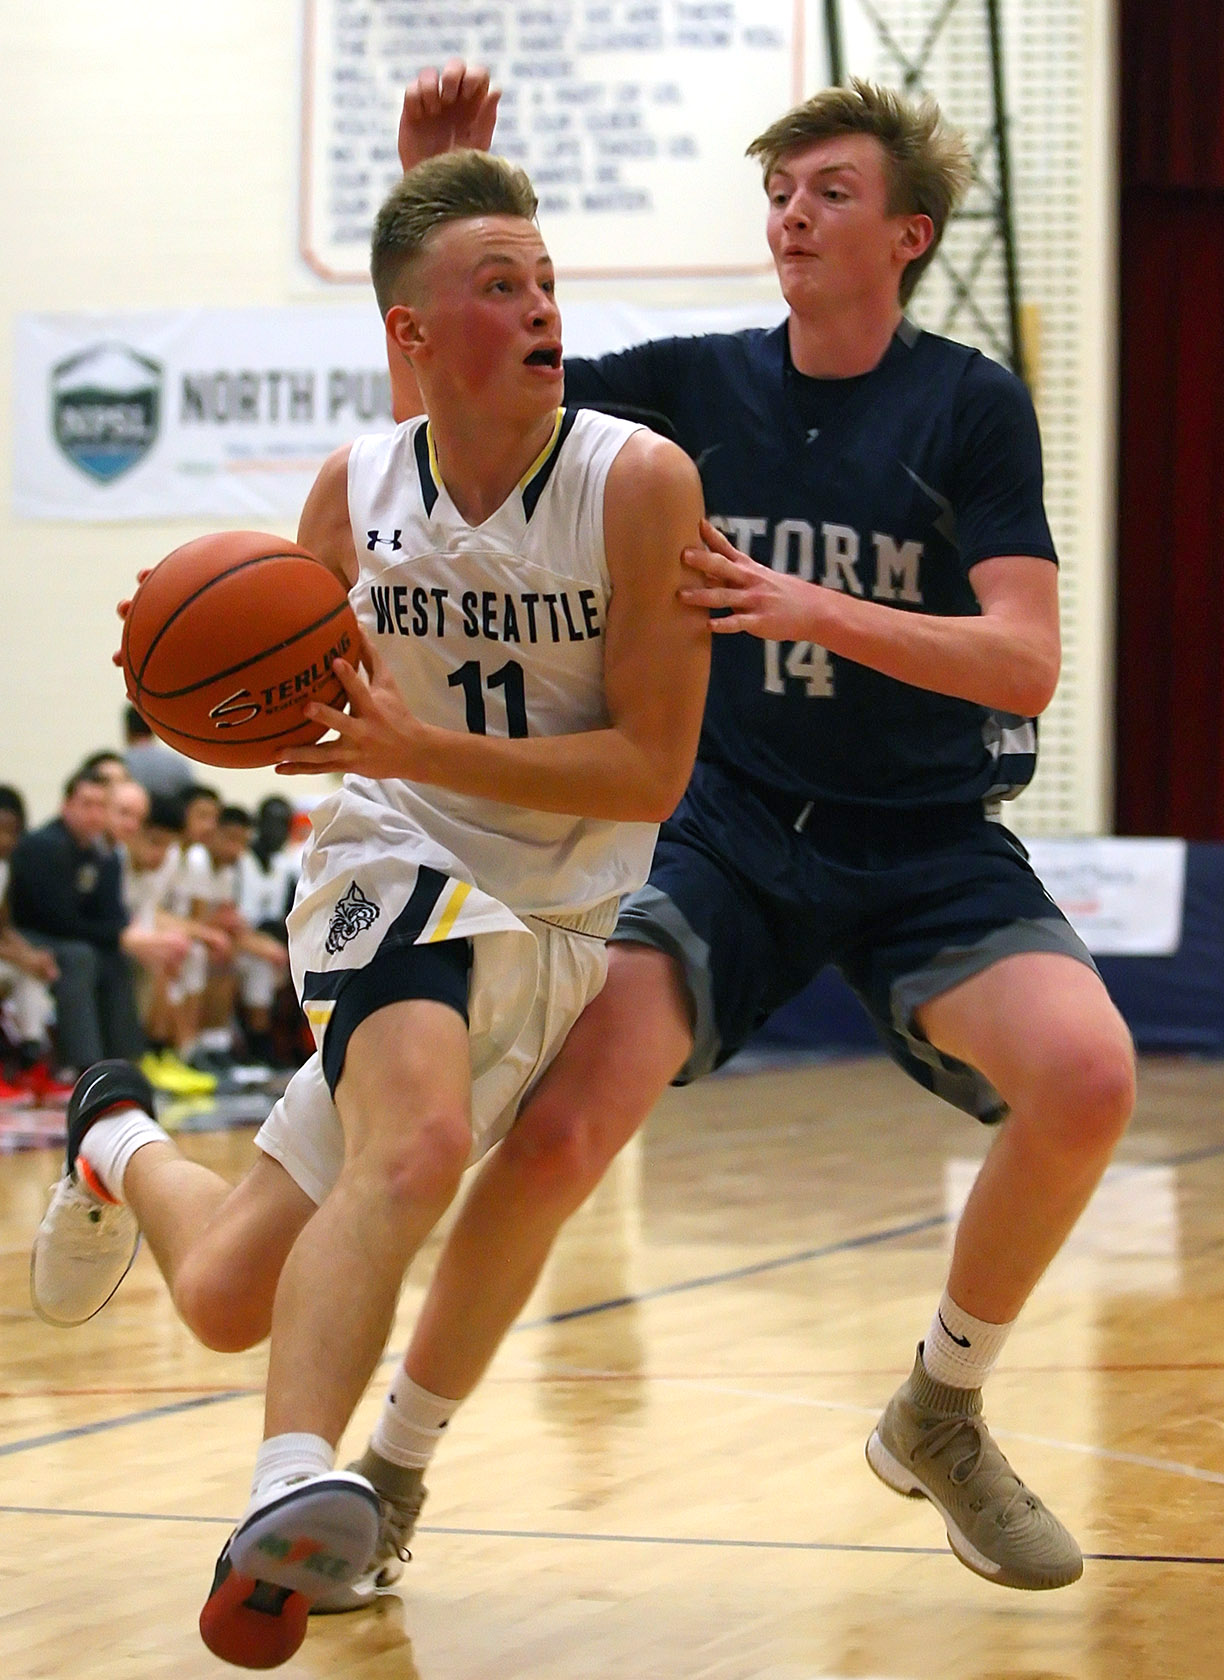 Jackson Golgart of West Seattle drives to the hoop with defensive pressure from Squalicum's Eric Monahan.